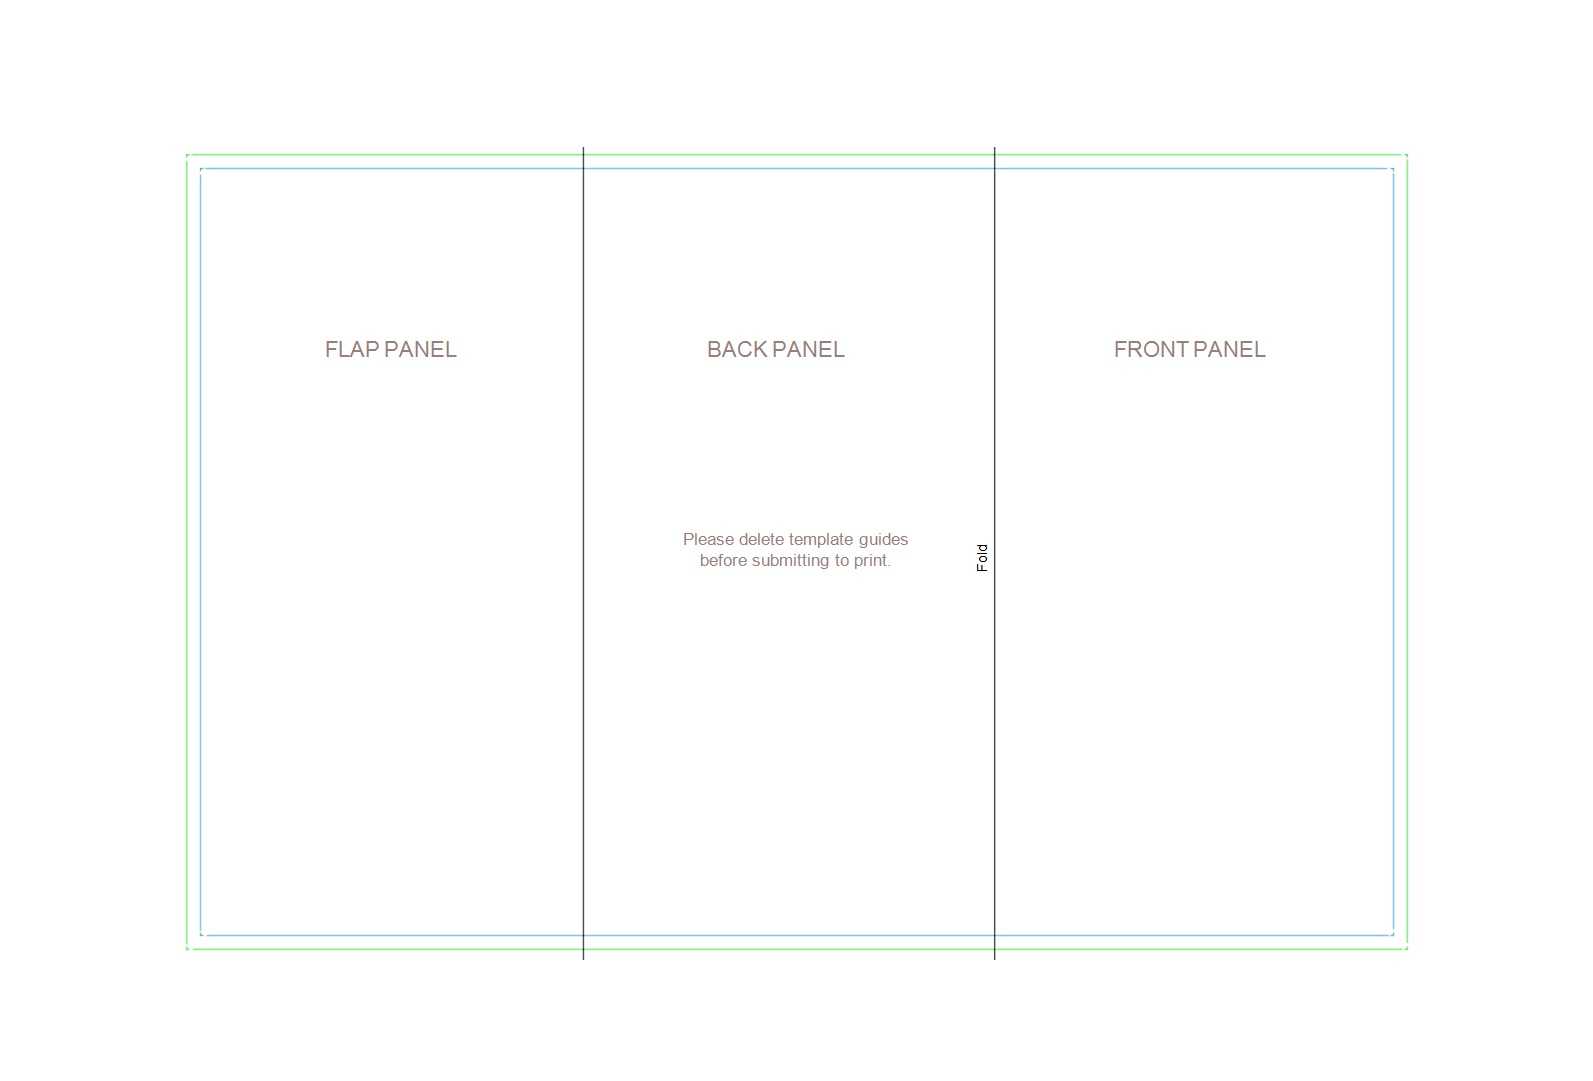 Pamphlet Template Docs - Dalep.midnightpig.co Throughout Google Docs Templates Brochure